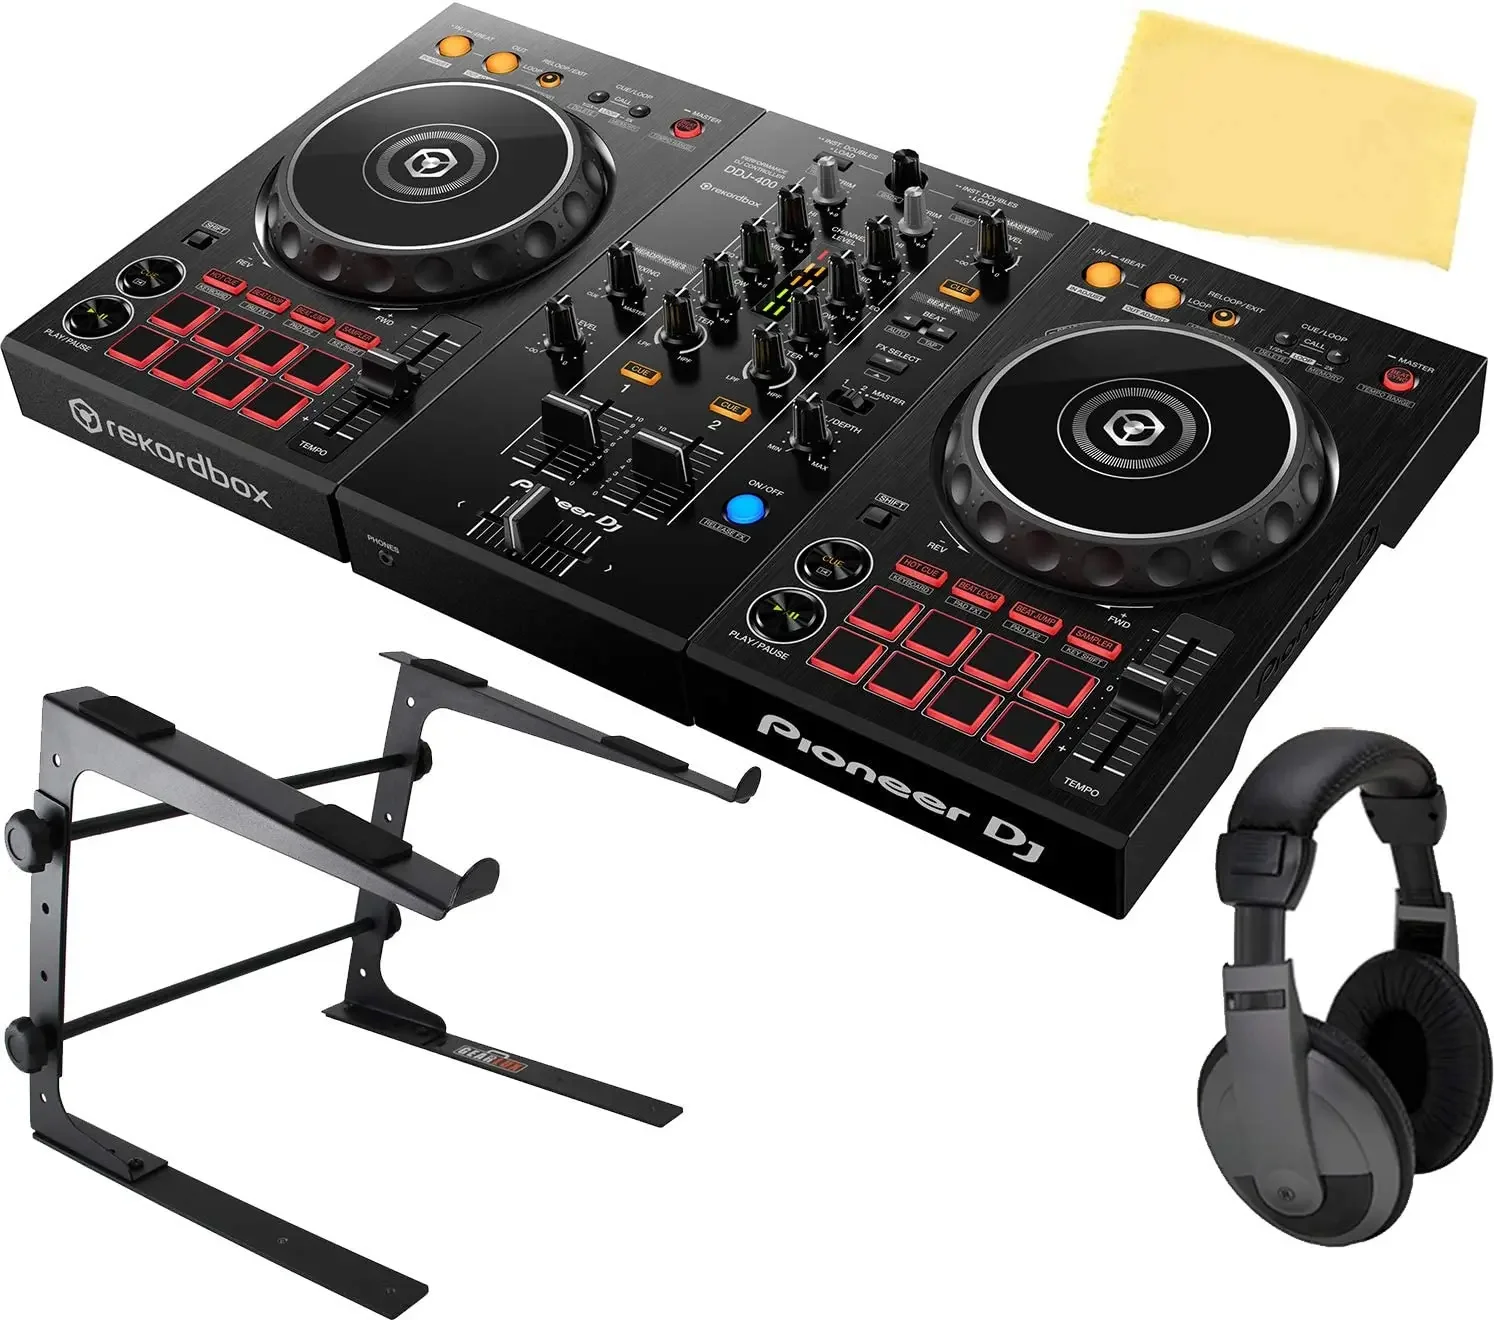 

SUMMER SALES DISCOUNT ON 100% DISCOUNTED Pioneer DDJ 1000 4 Channel rekordbox dj Controller with Integrated Mixer Deluxe offer